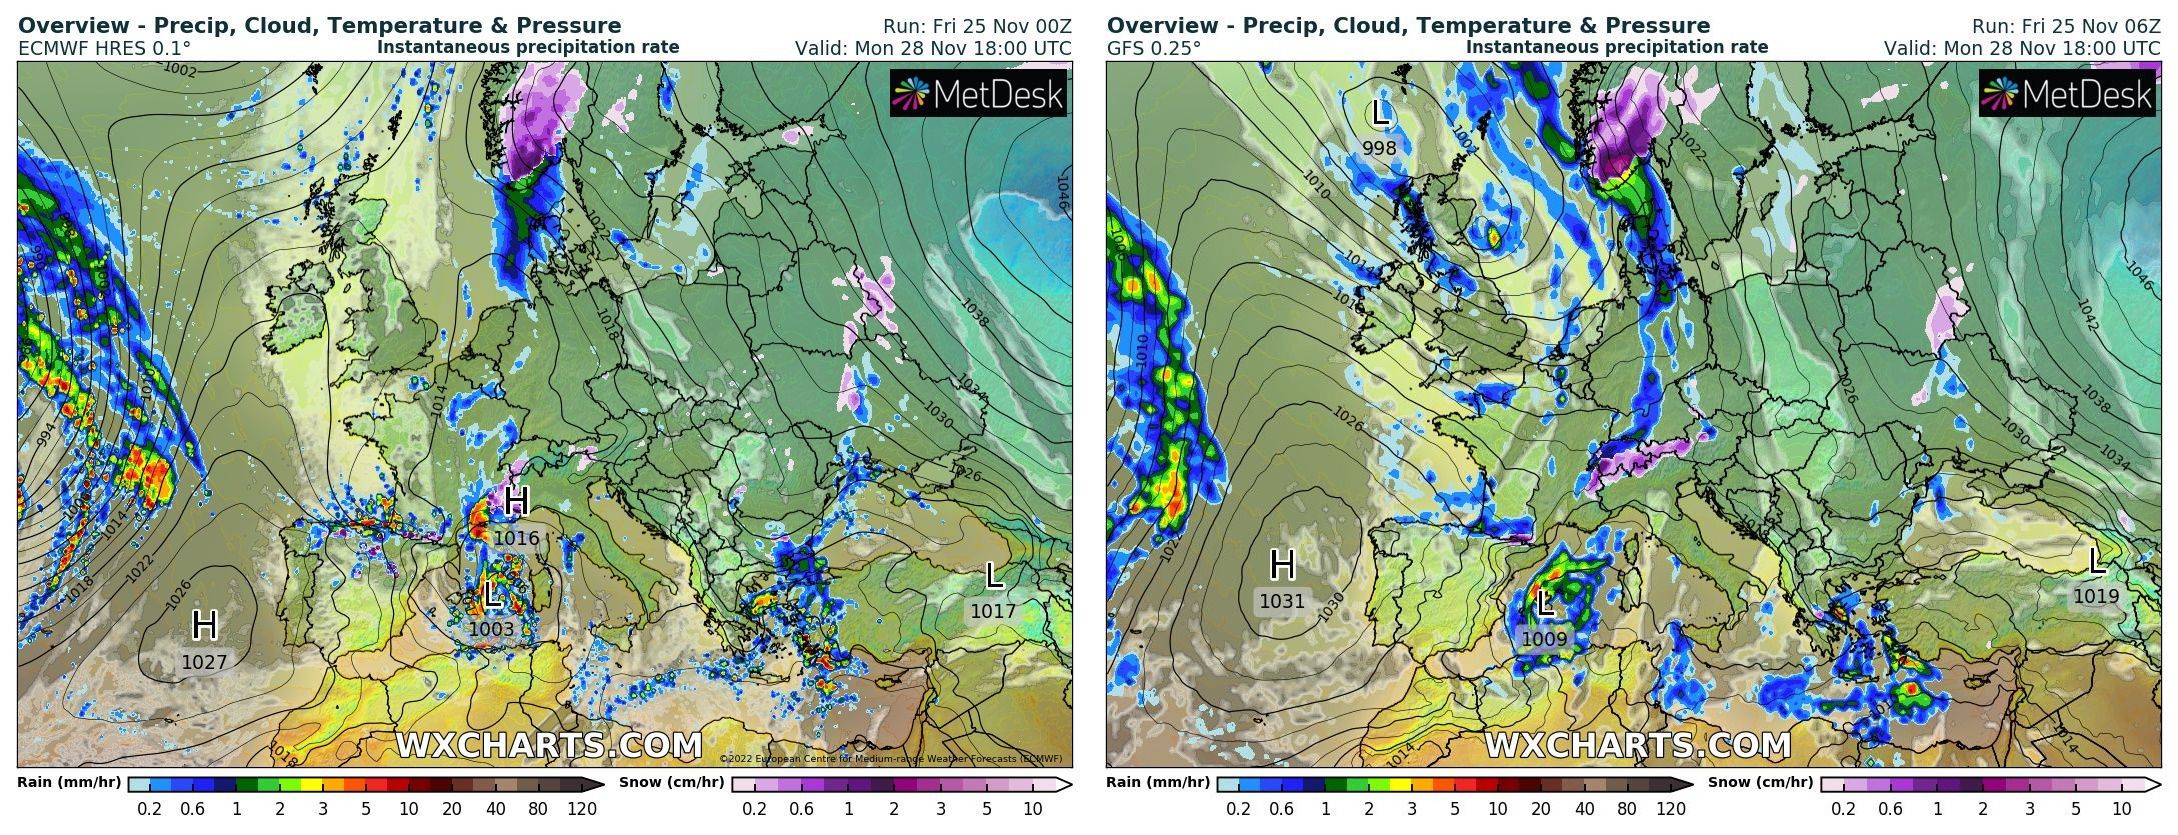 Differences between ECMWF (left) and GFS (right) for Monday night (wxcharts.com)